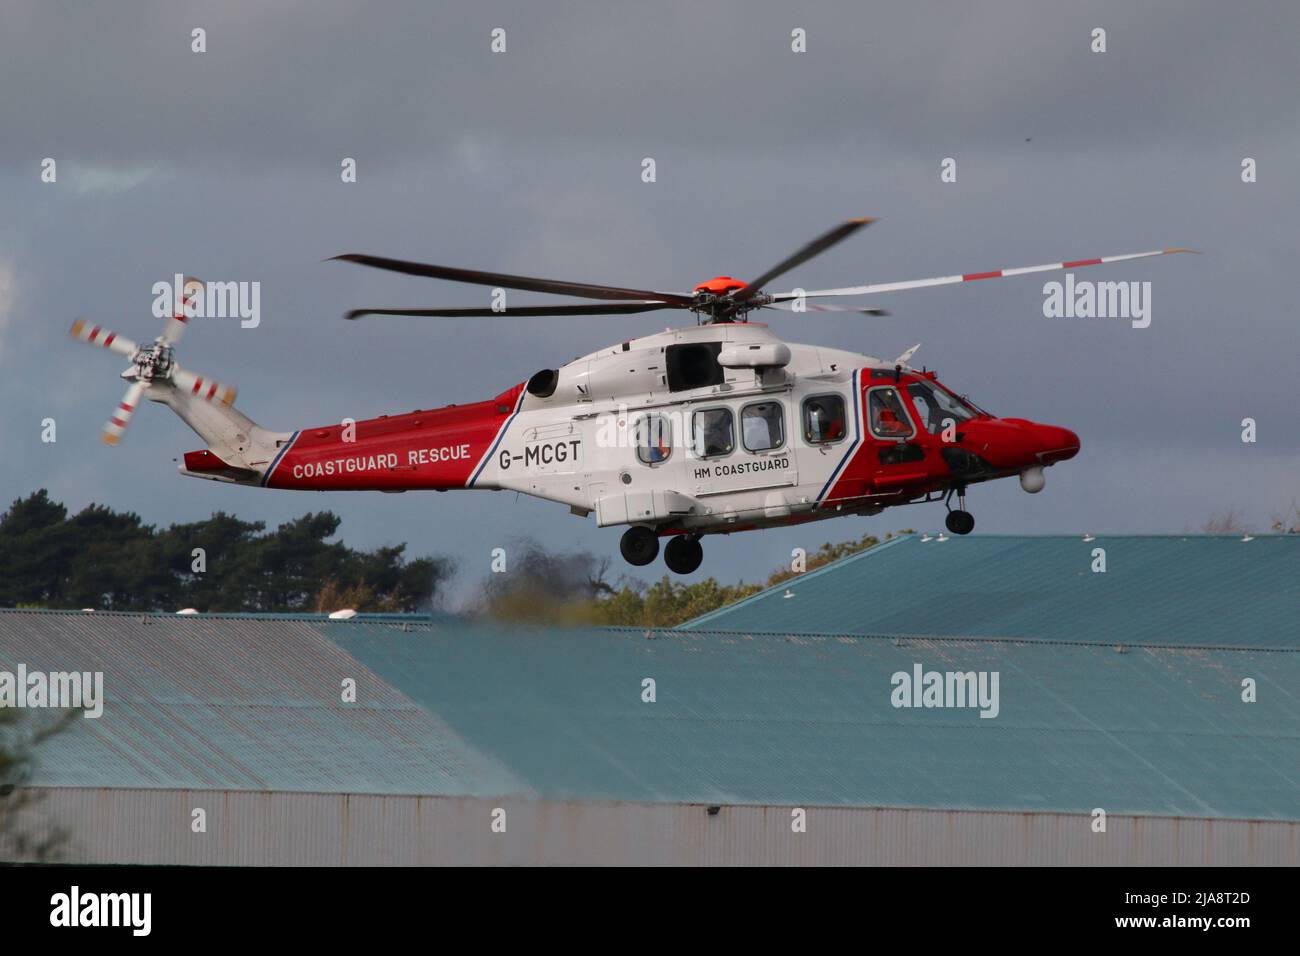 G-MCGT, a AgustaWestland AW189 operated by Bristow Helicopters on behalf of HM Coastguard, at Prestwick International Airport in Ayrshire. Stock Photo